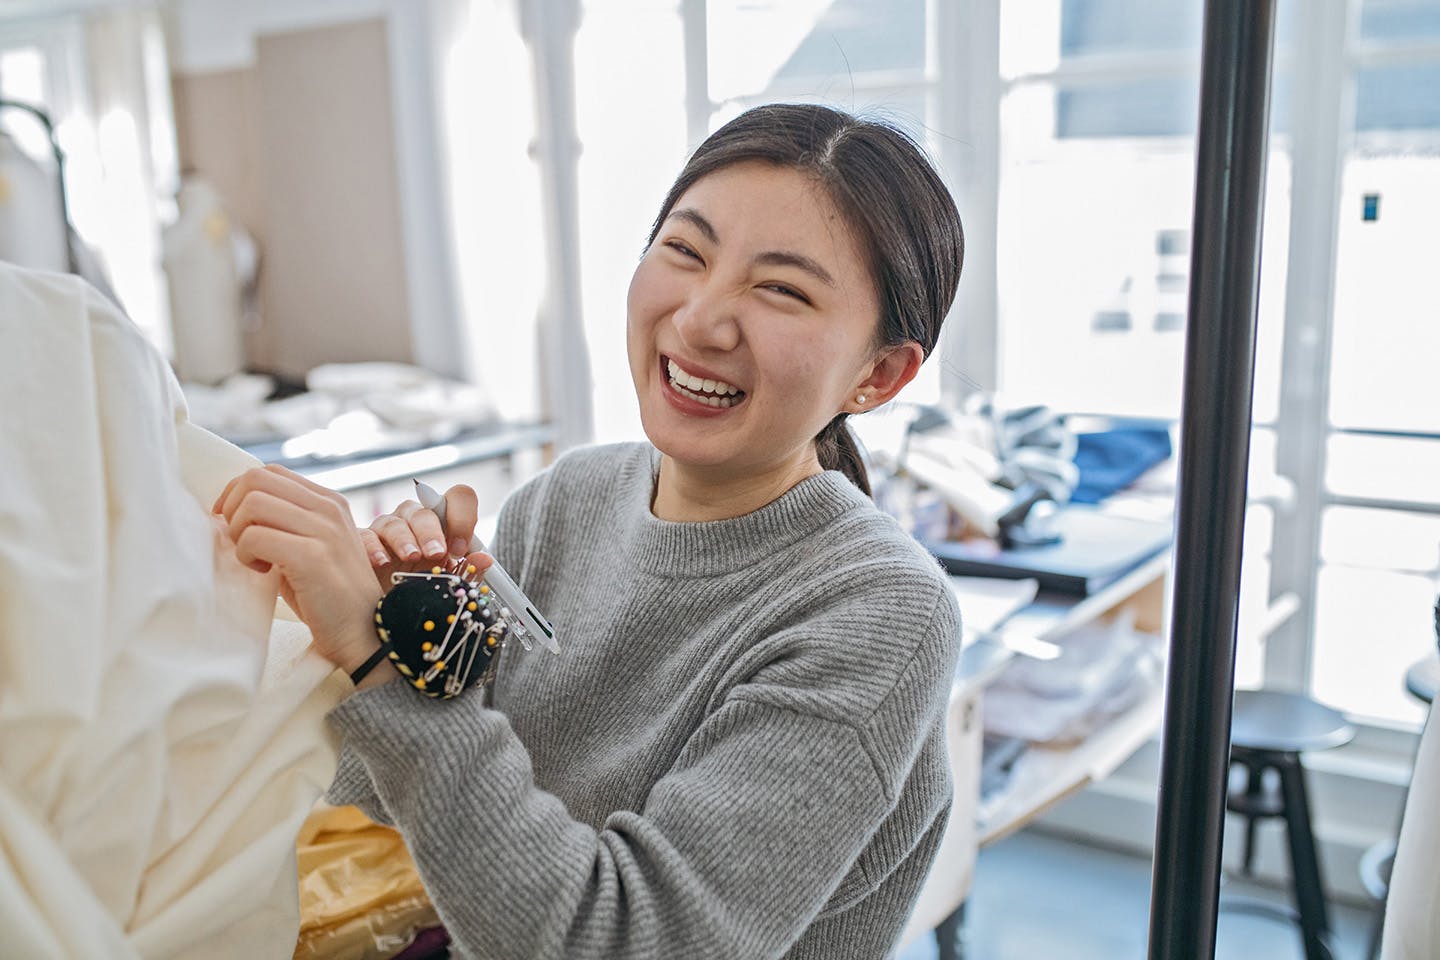 A student laughing while working on a garment with pins and a pen.